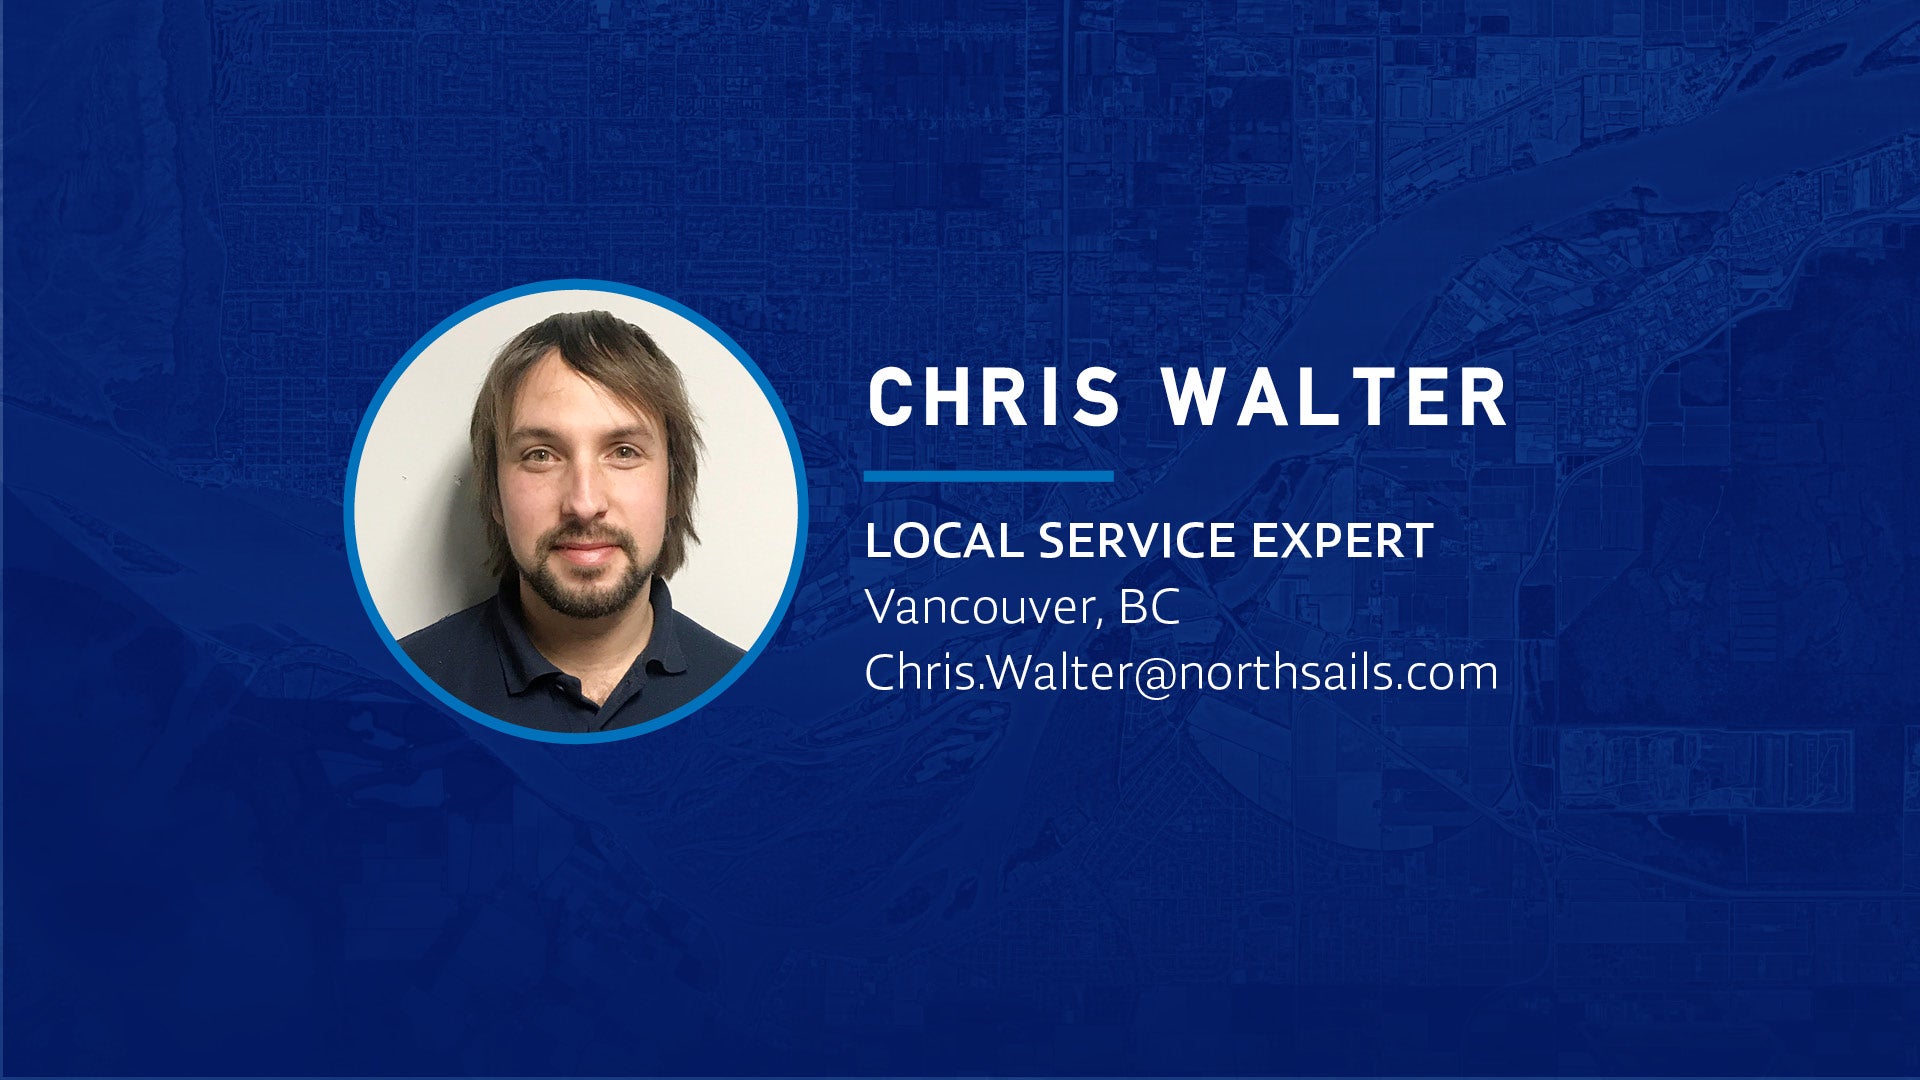 WHO WE ARE: CHRIS WALTER